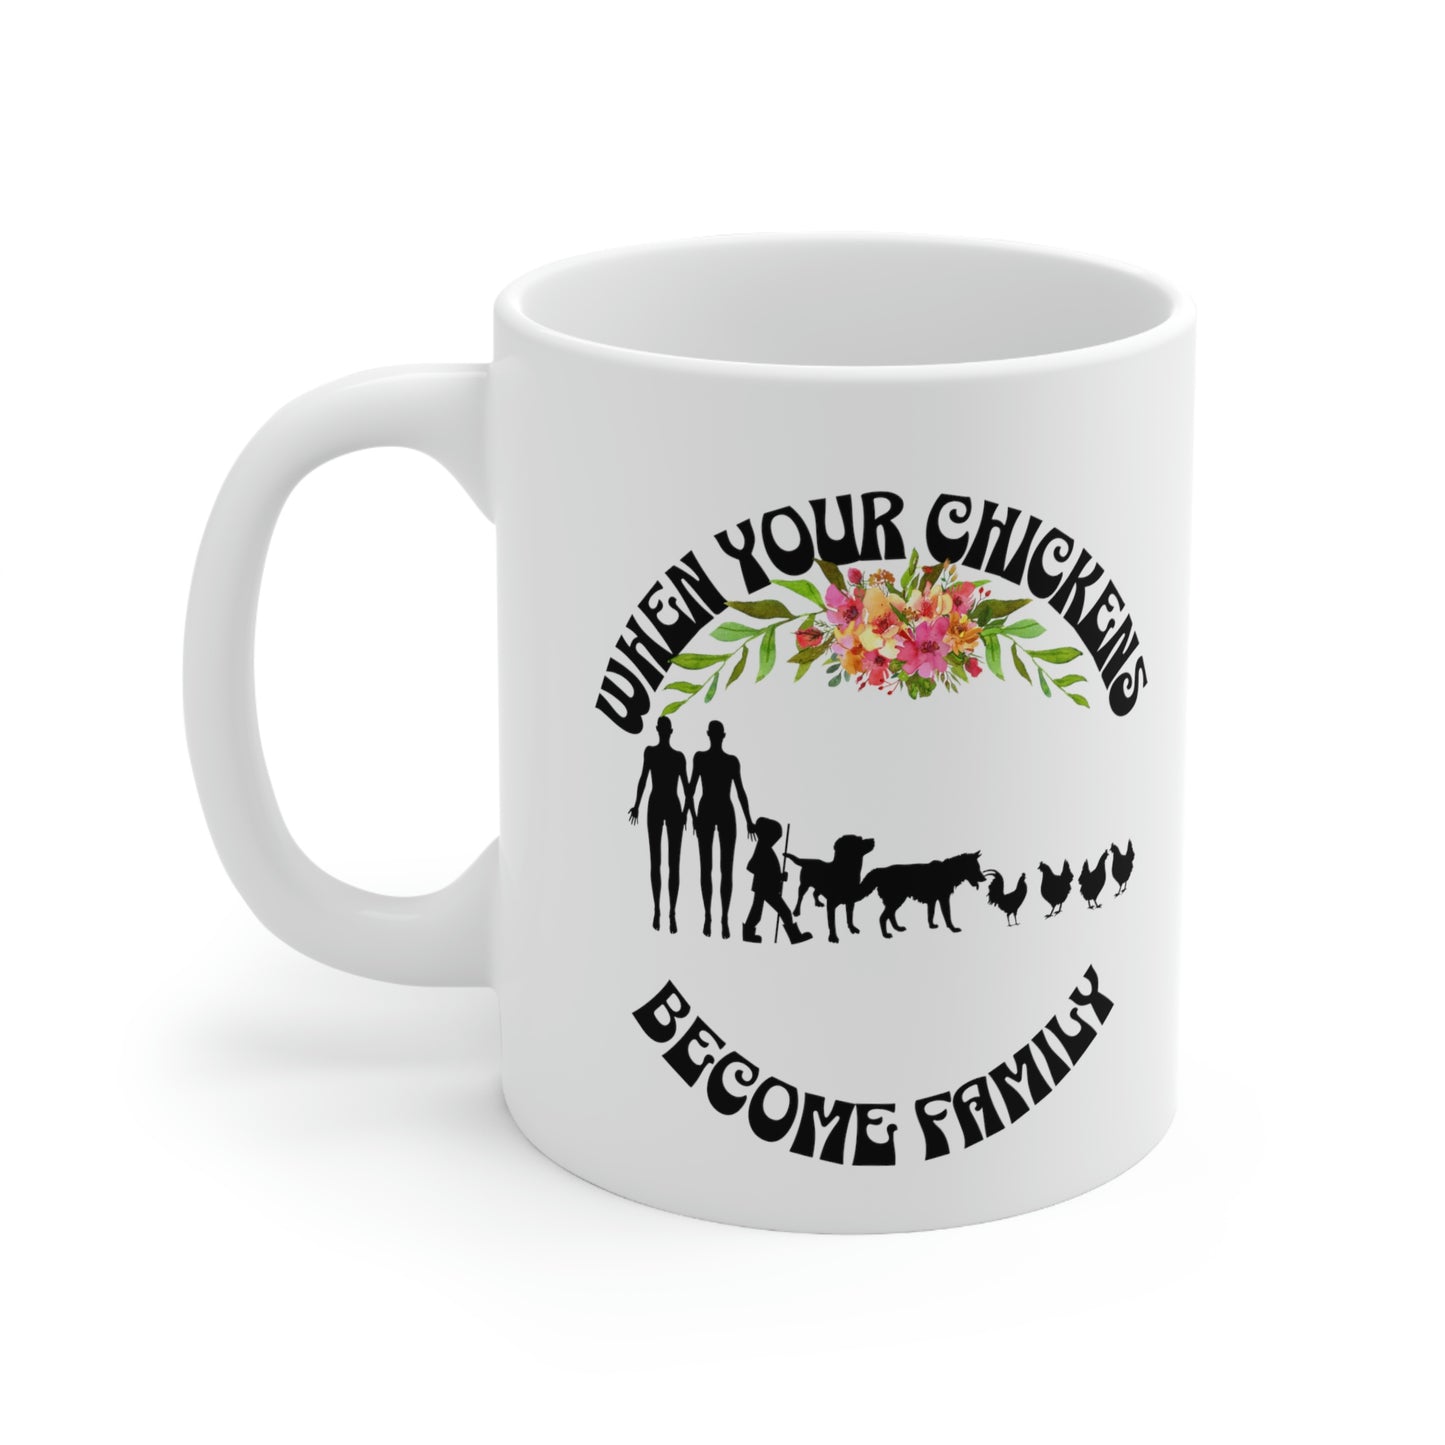 Ceramic Mug 11oz When Chickens Become Family Funny Coffee Cup